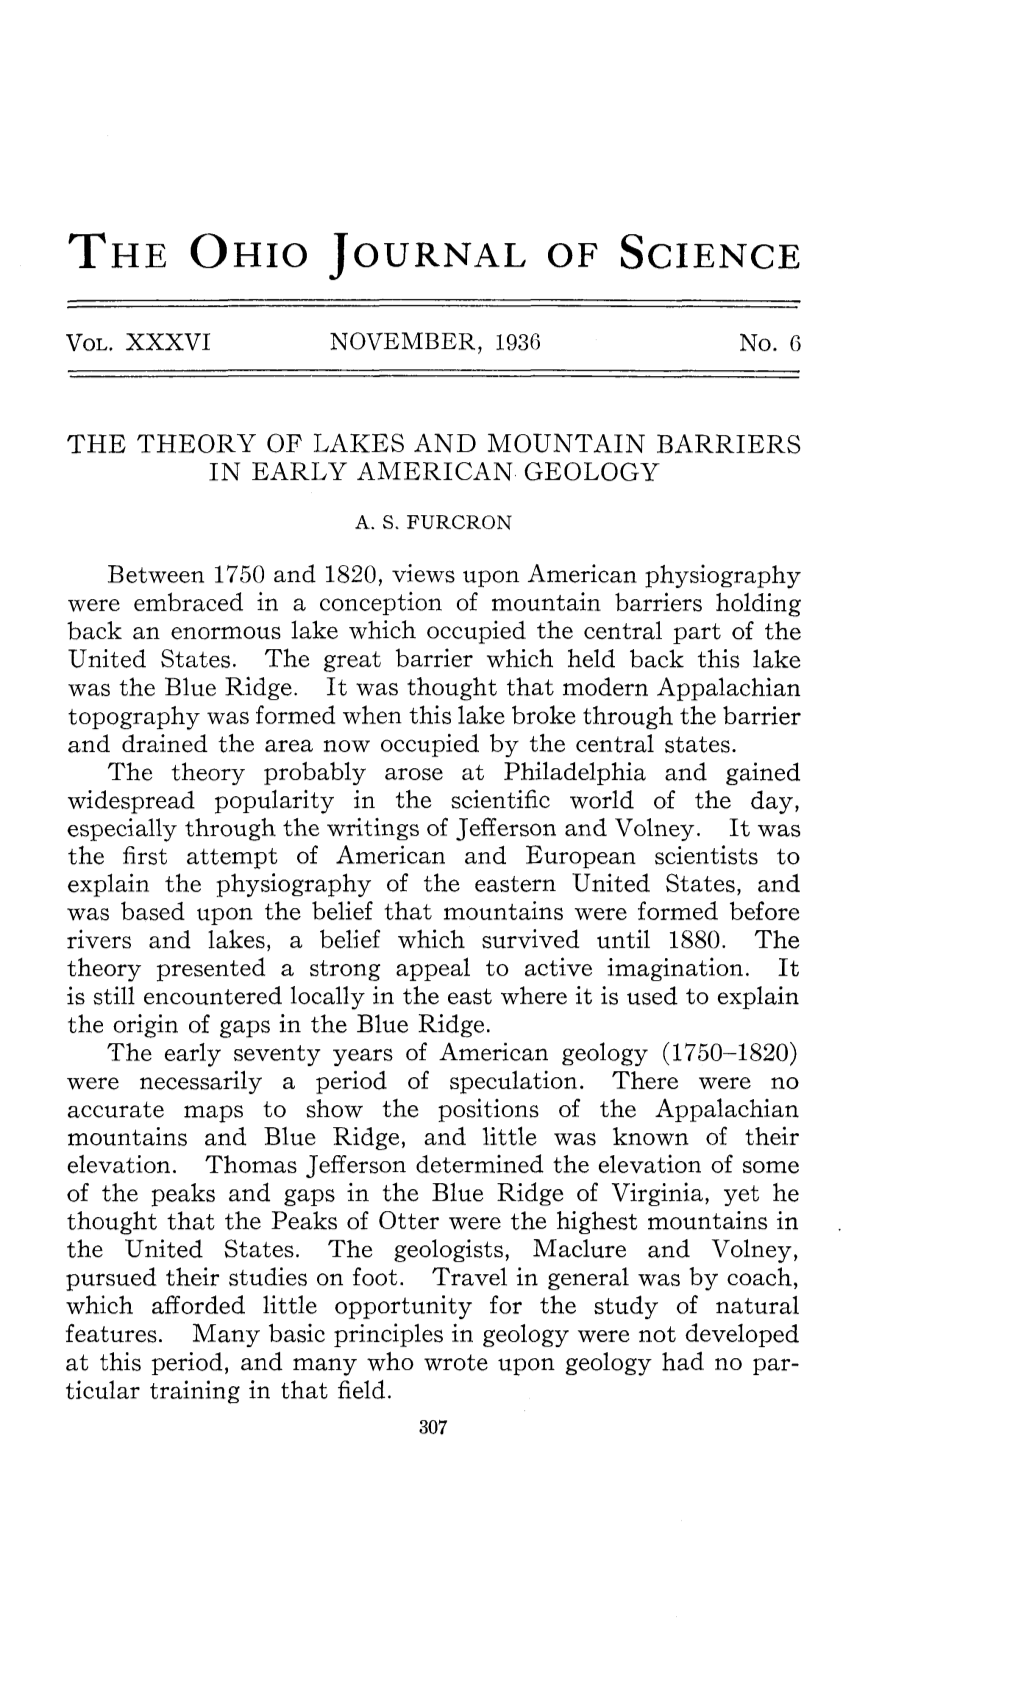 The Theory of Lakes and Mountain Barriers in Early American Geology